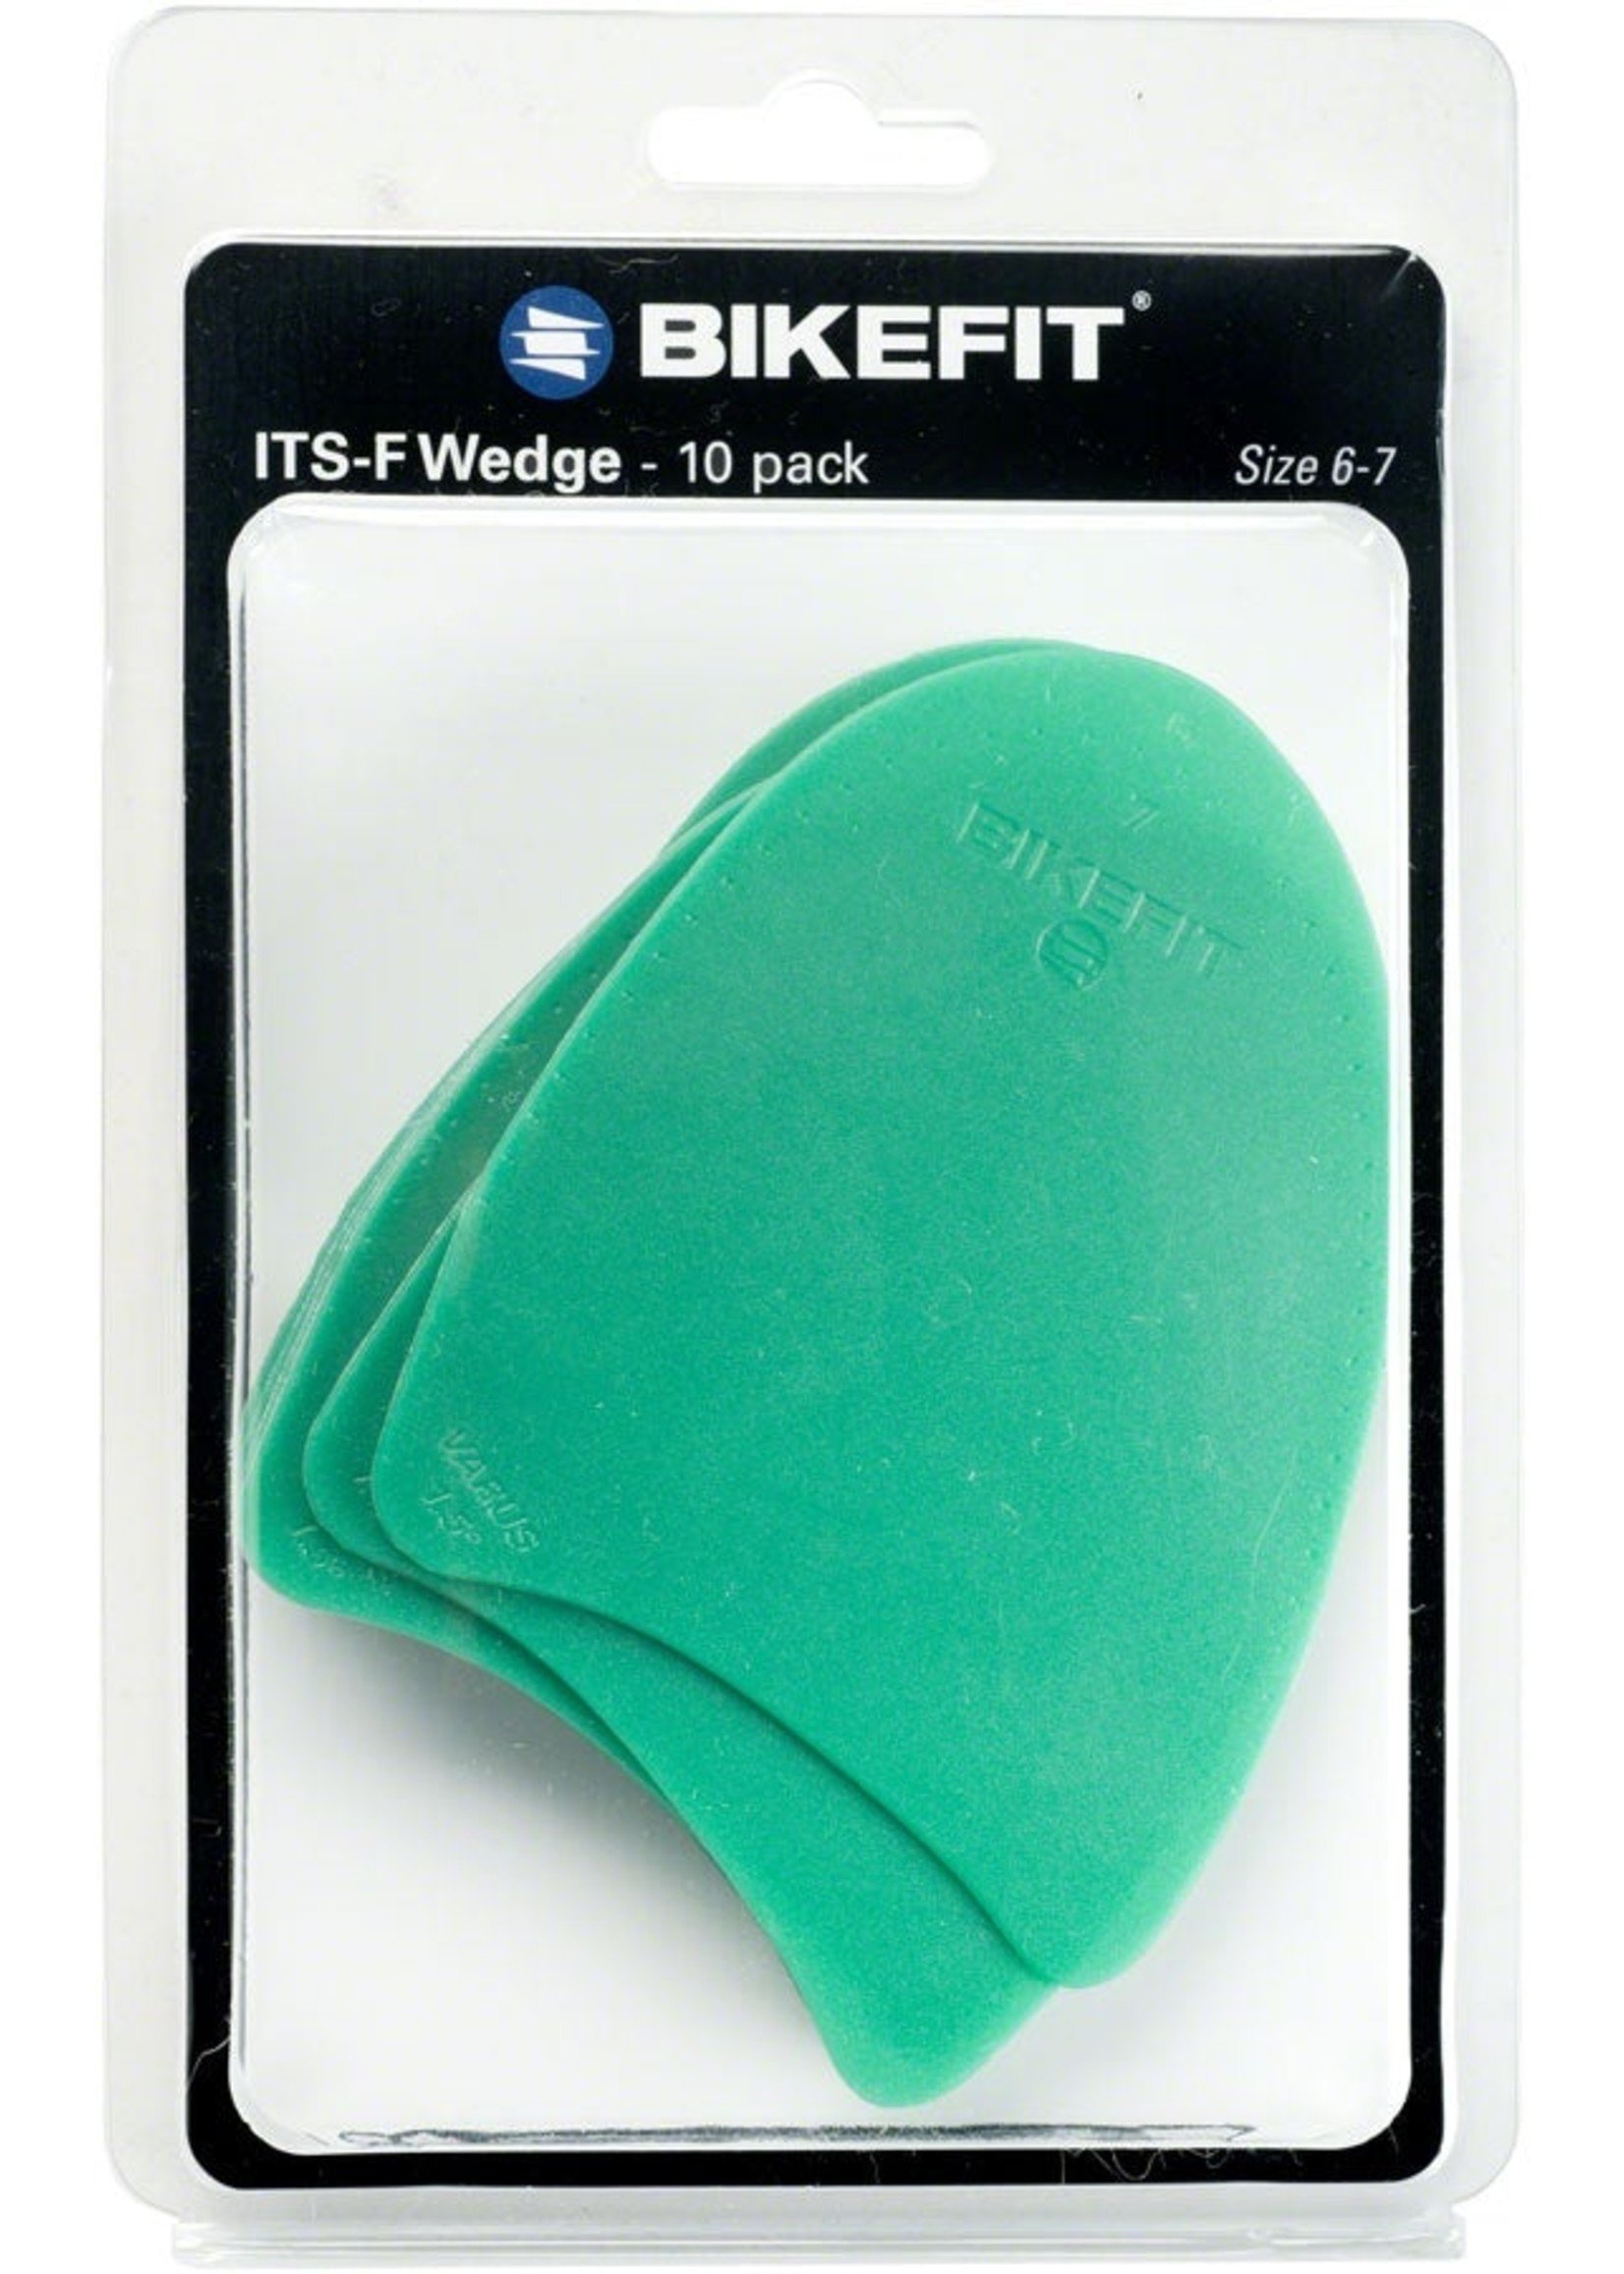 BikeFit In The Shoe ForeFoot Wedges - Size 6-7, 10-Pack